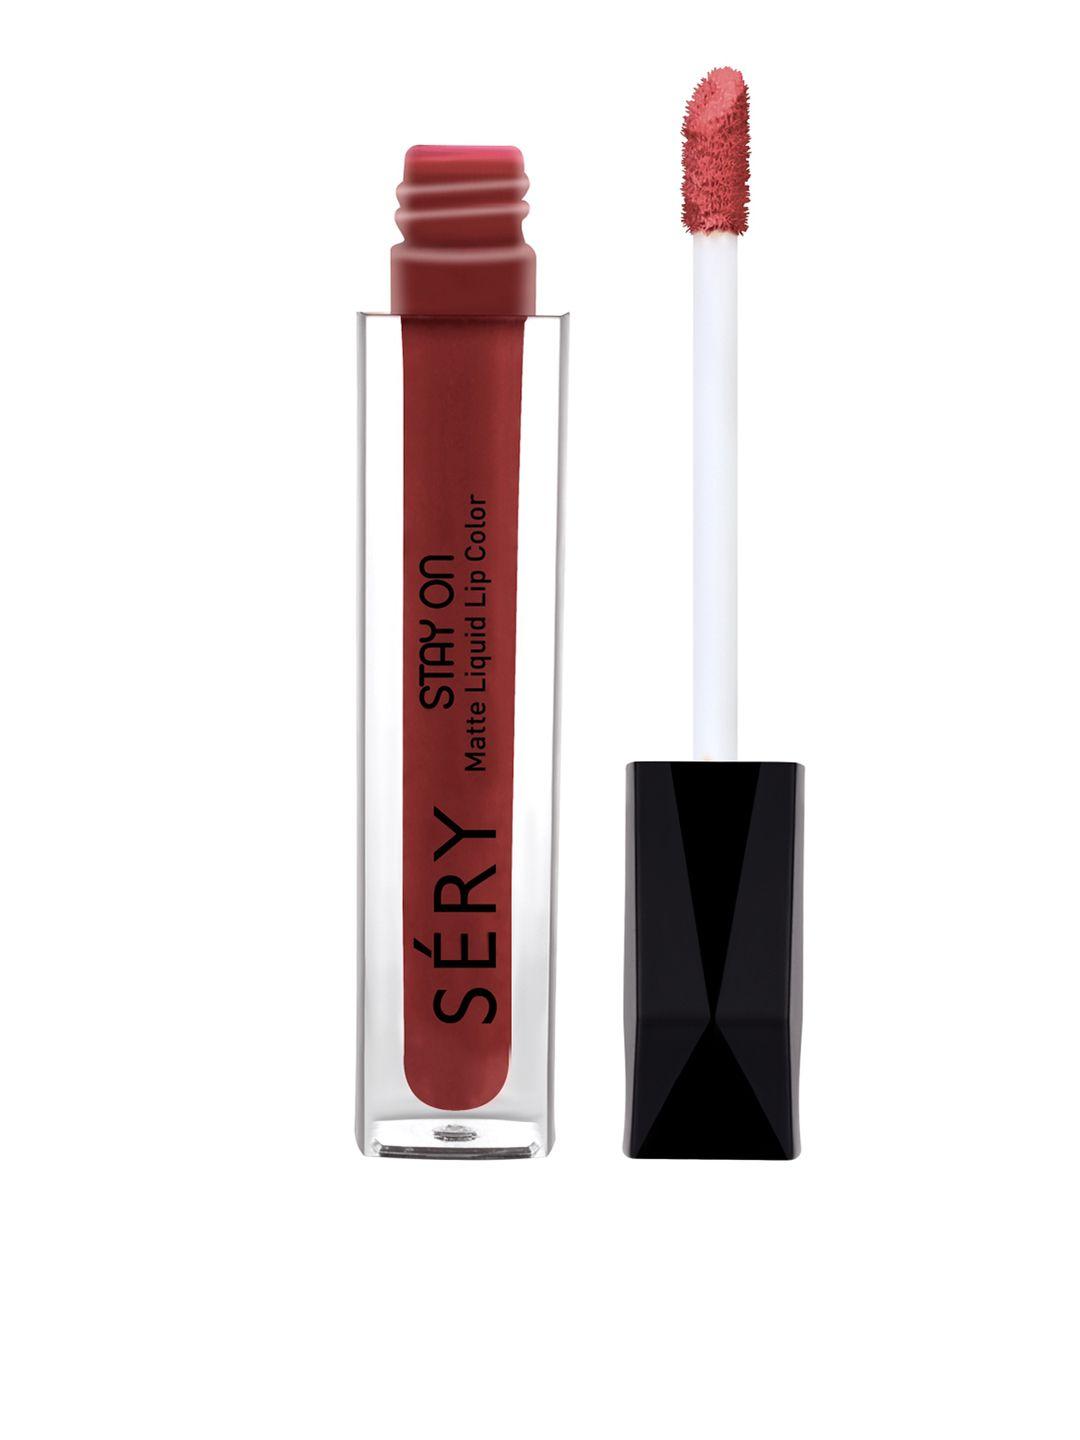 sery stay on matte liquid long-lasting lip color 5 ml - call me chocolate 08